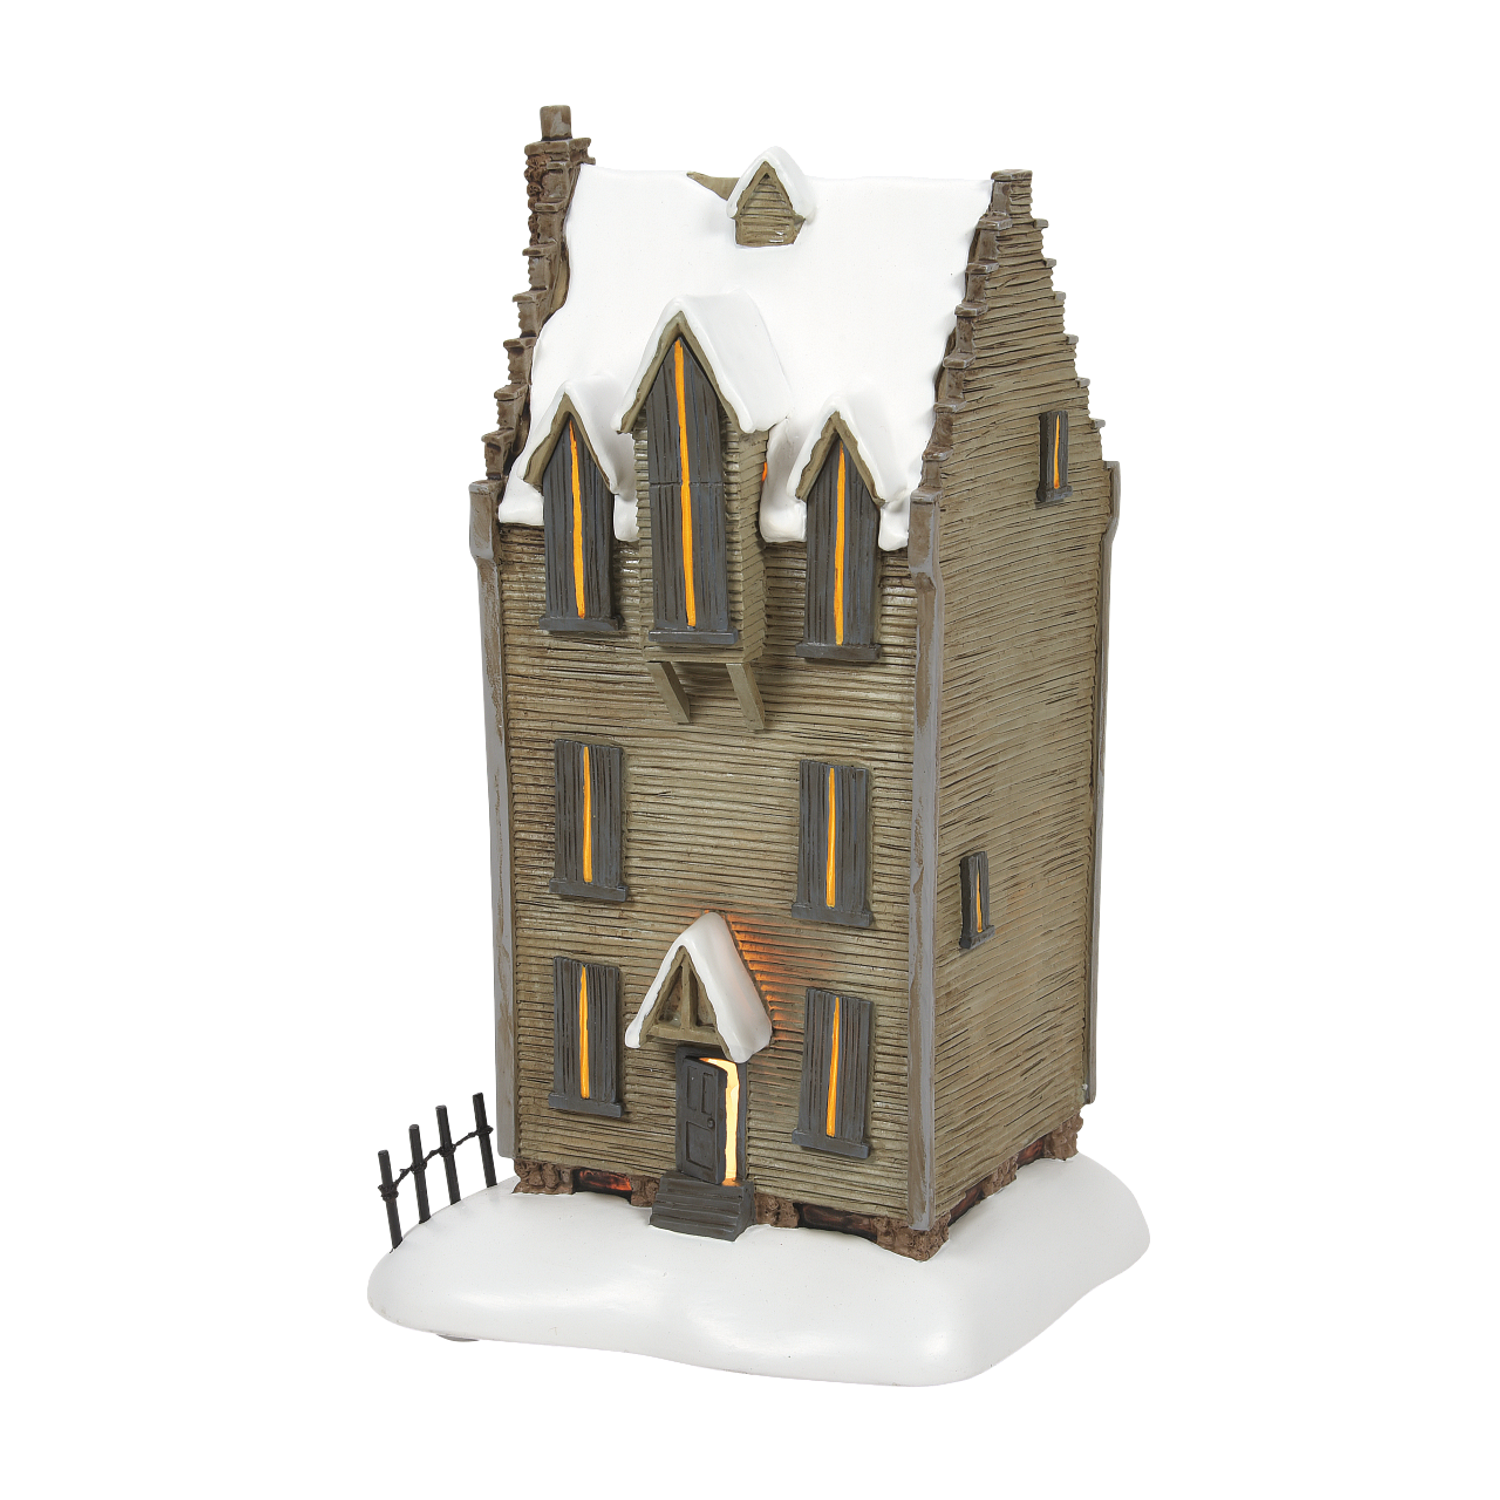  Department 56, Glass Stone Harry Potter Village the